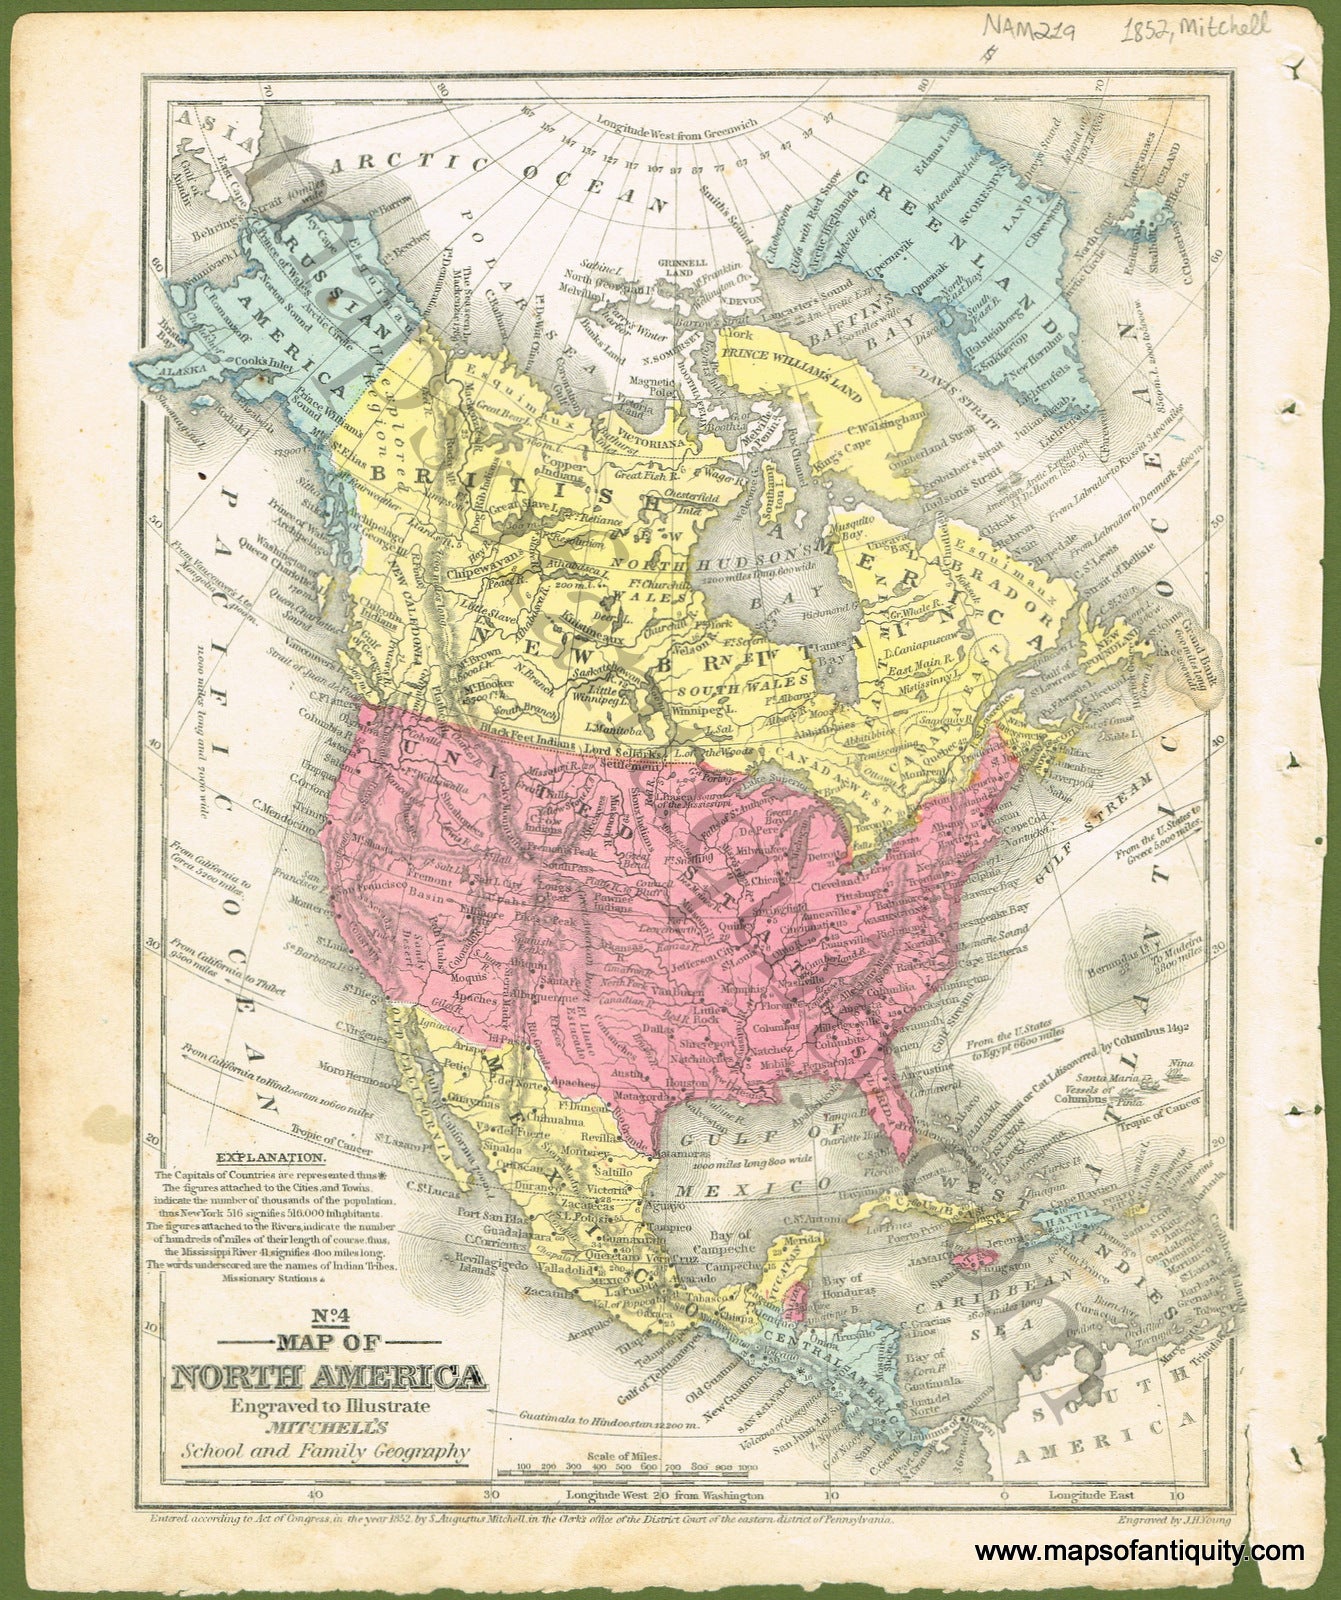 Antique-Hand-Colored-Map-No.-4-Map-of-North-America-North-America-North-America-General-1852-Mitchell-Maps-Of-Antiquity